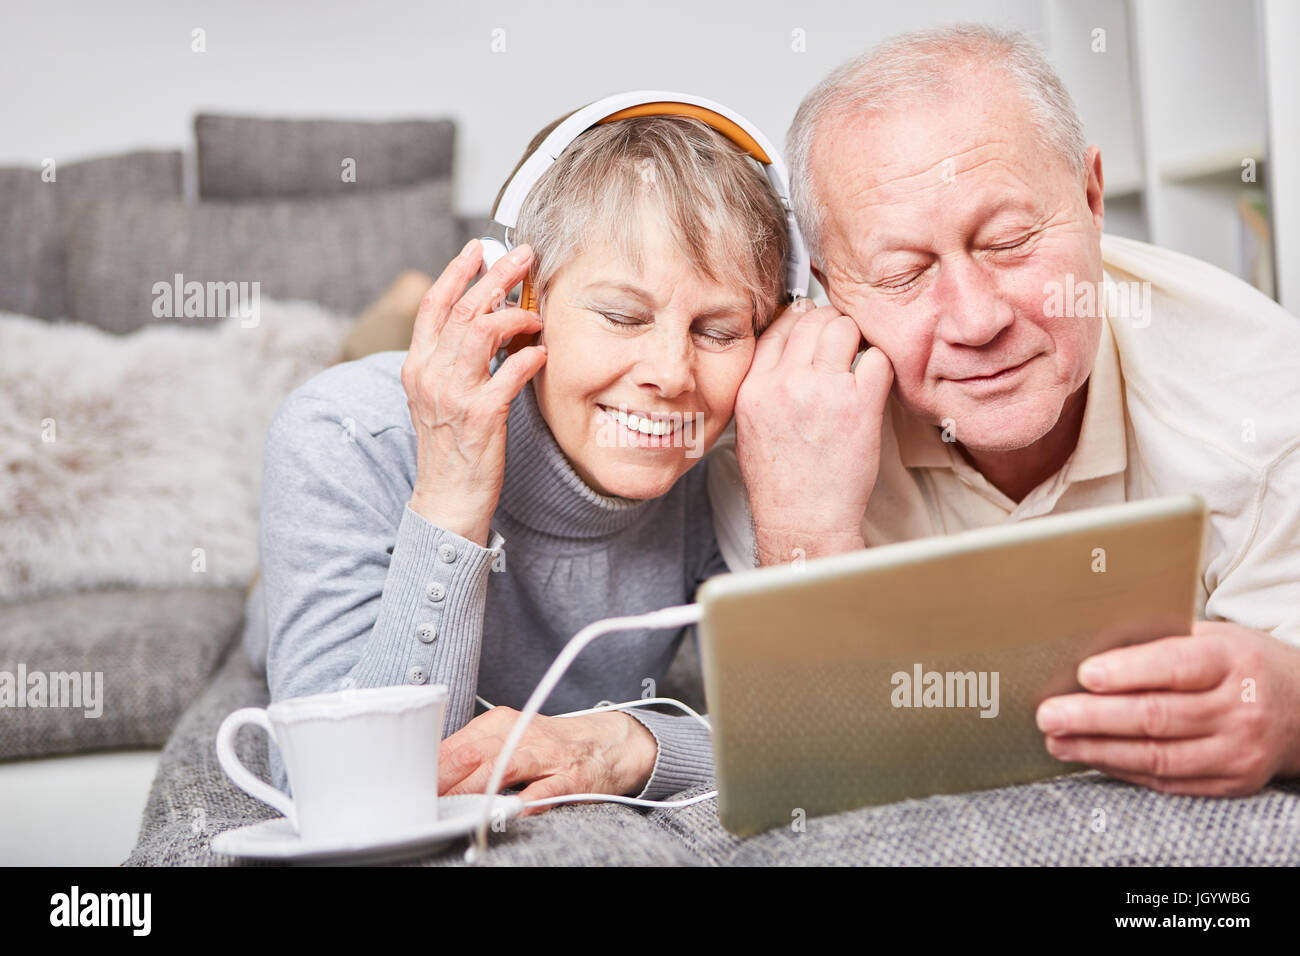 Seniors listen to music with enjoyment for relaxation on couch Stock Photo